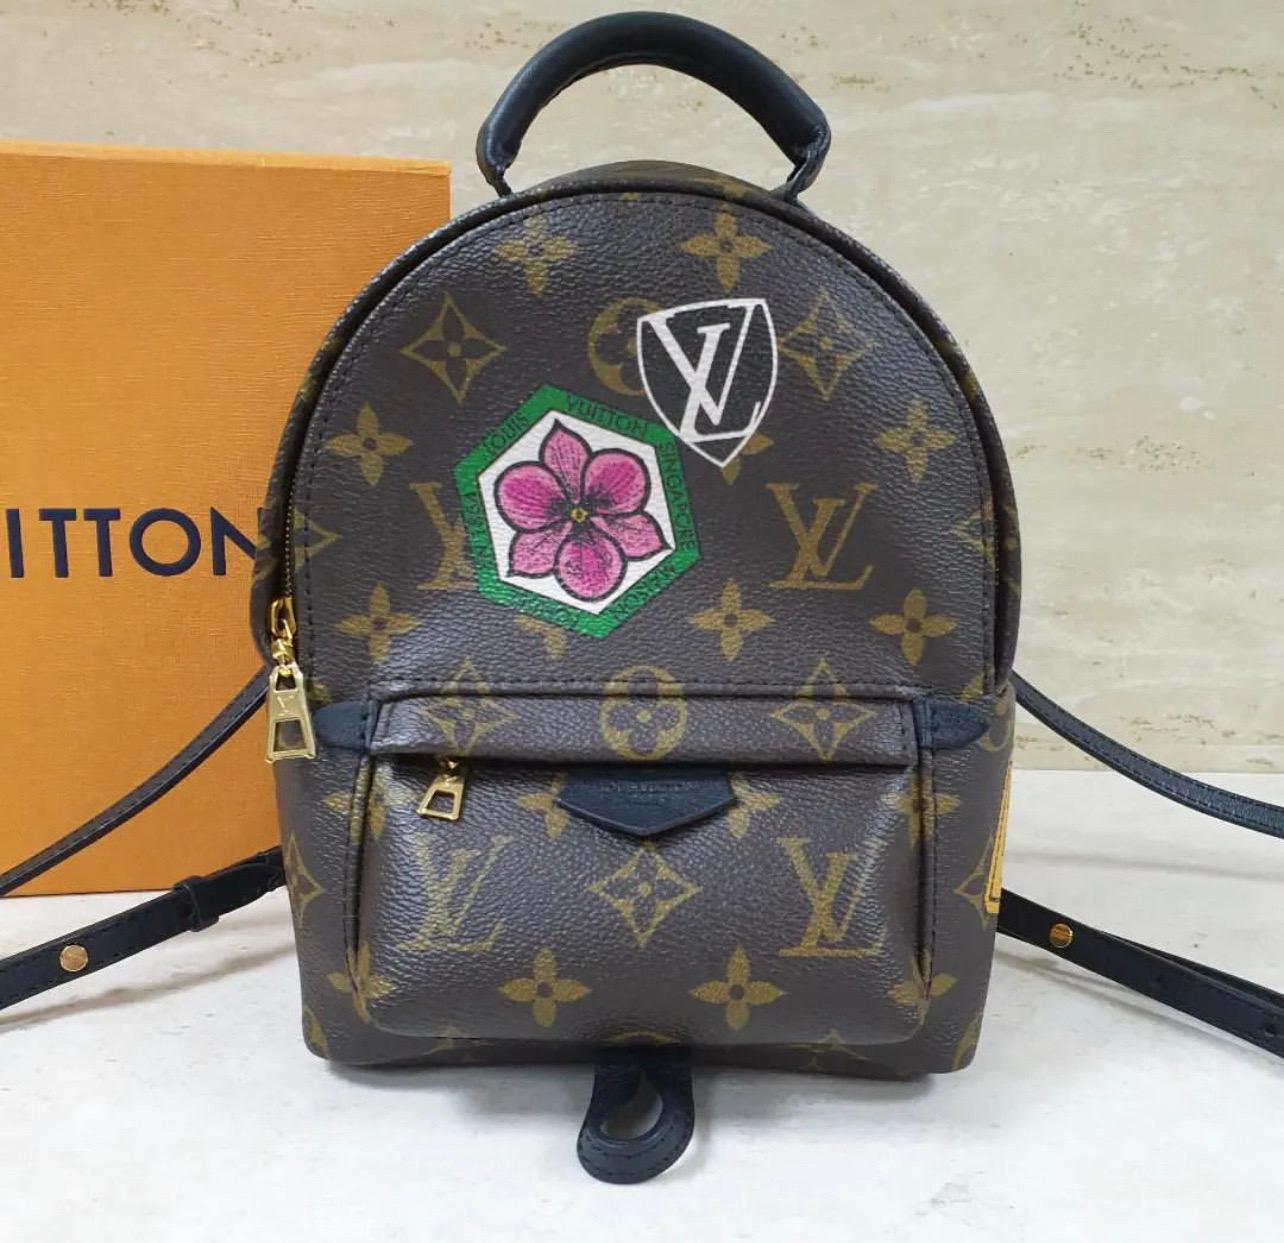 
This is an authentic LOUIS VUITTON Monogram My World Tour Palm Springs Backpack Mini.
This backpack features a body of sturdy monogram coated canvas with world tour badges and black calfskin accents.
The backpack features a front zipped pocket, a